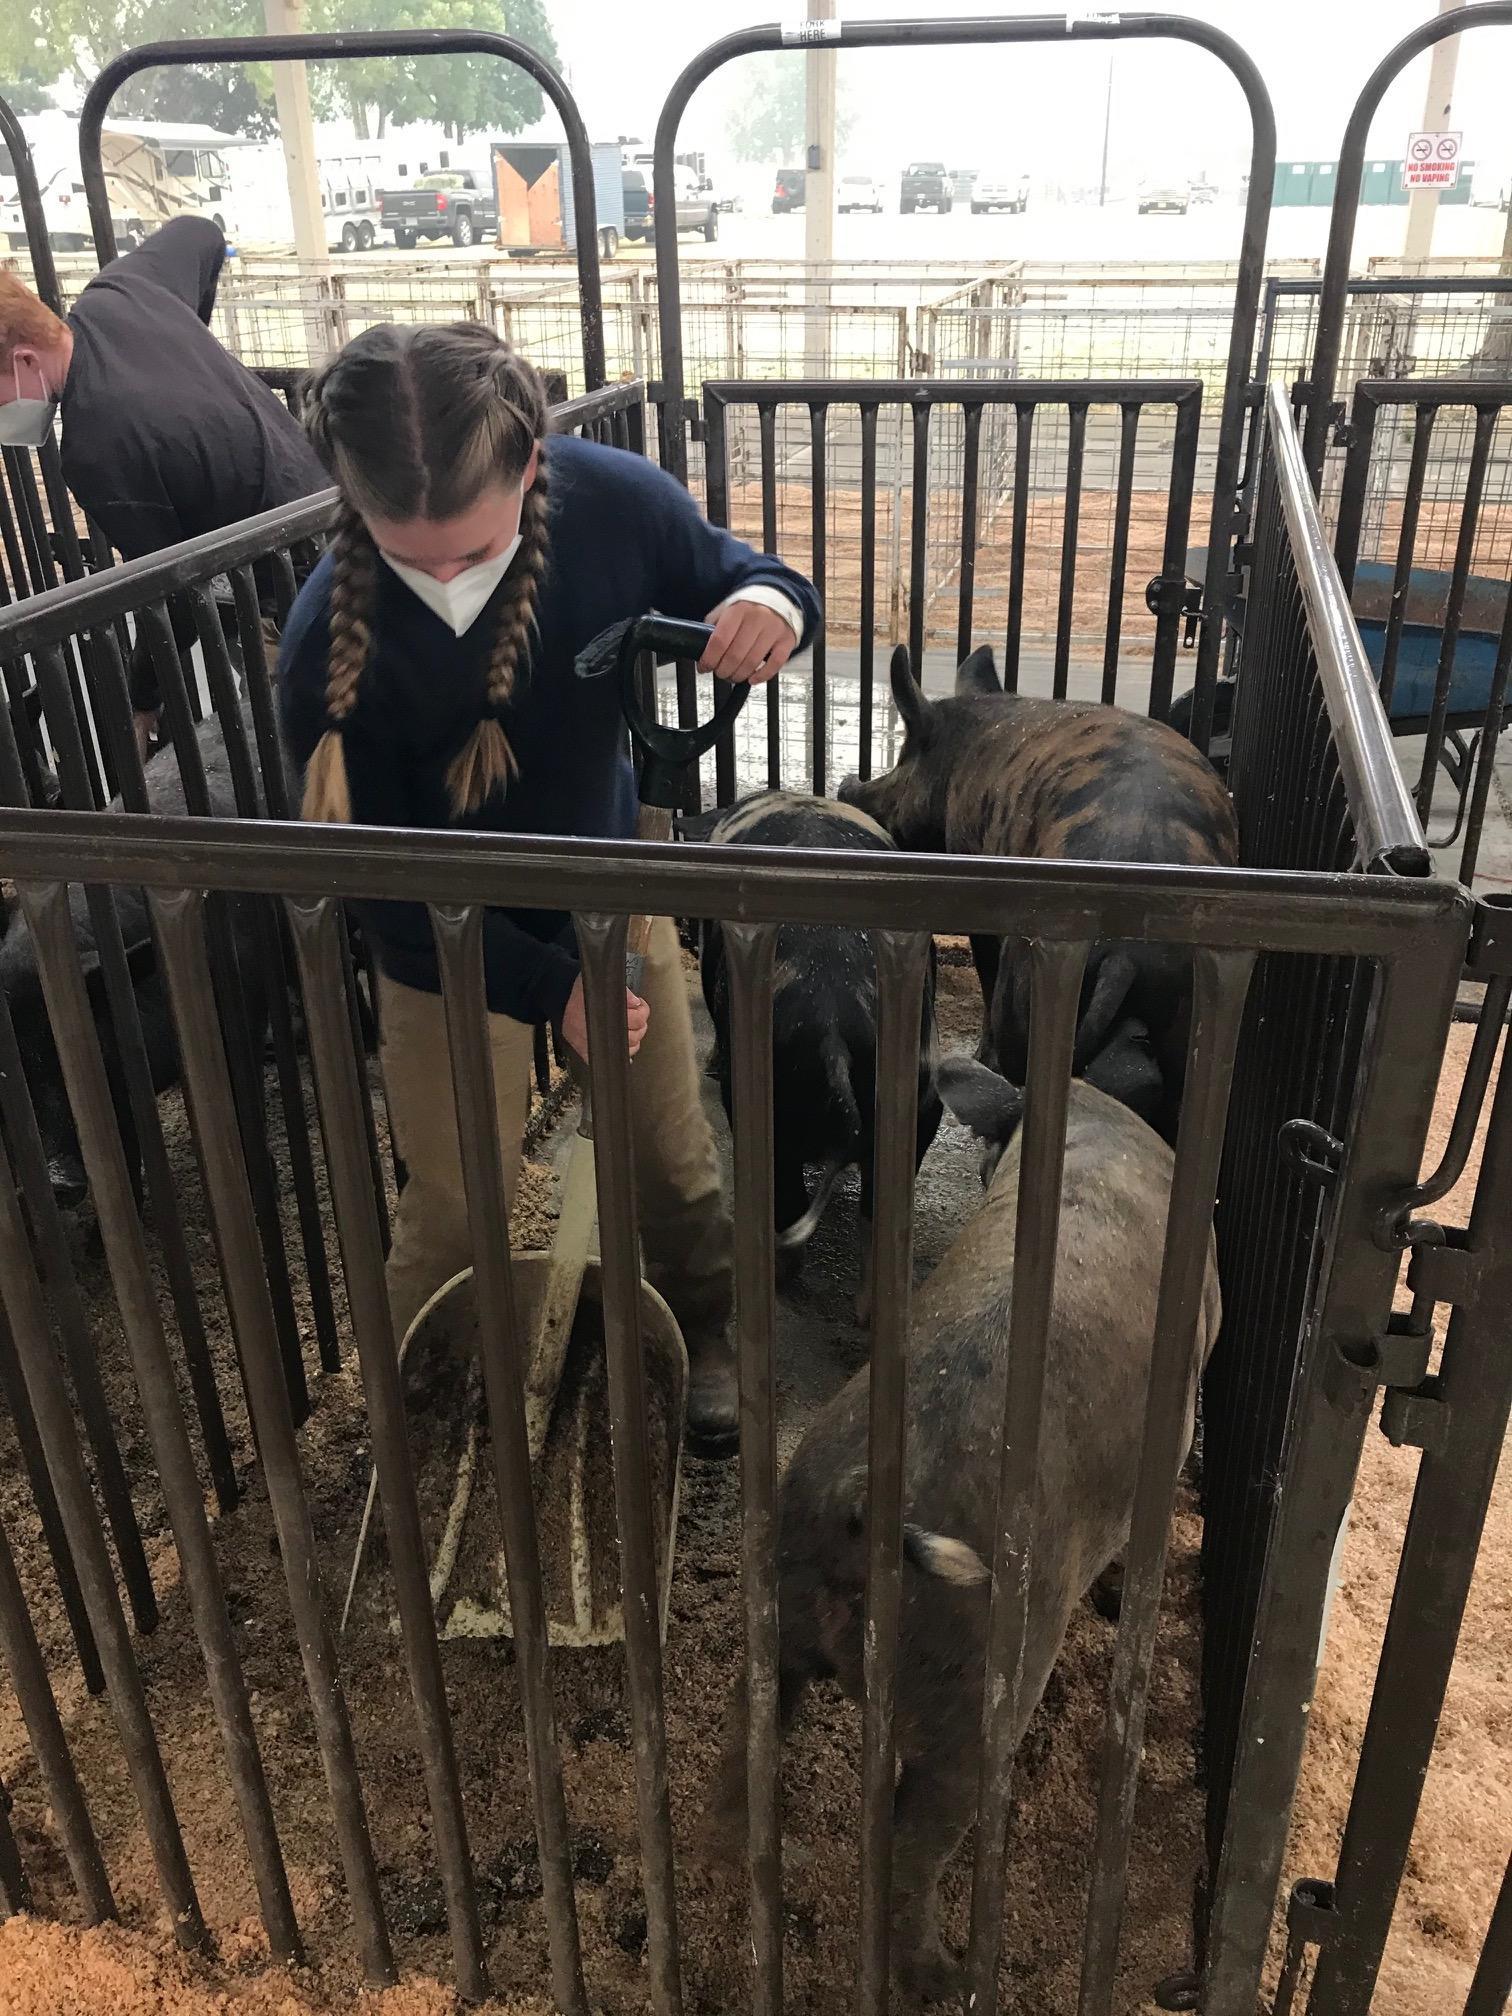 A Washington County 4-H youth shovels a pen that holds pigs that were evacuated to the fairgrounds during the Oregon wil